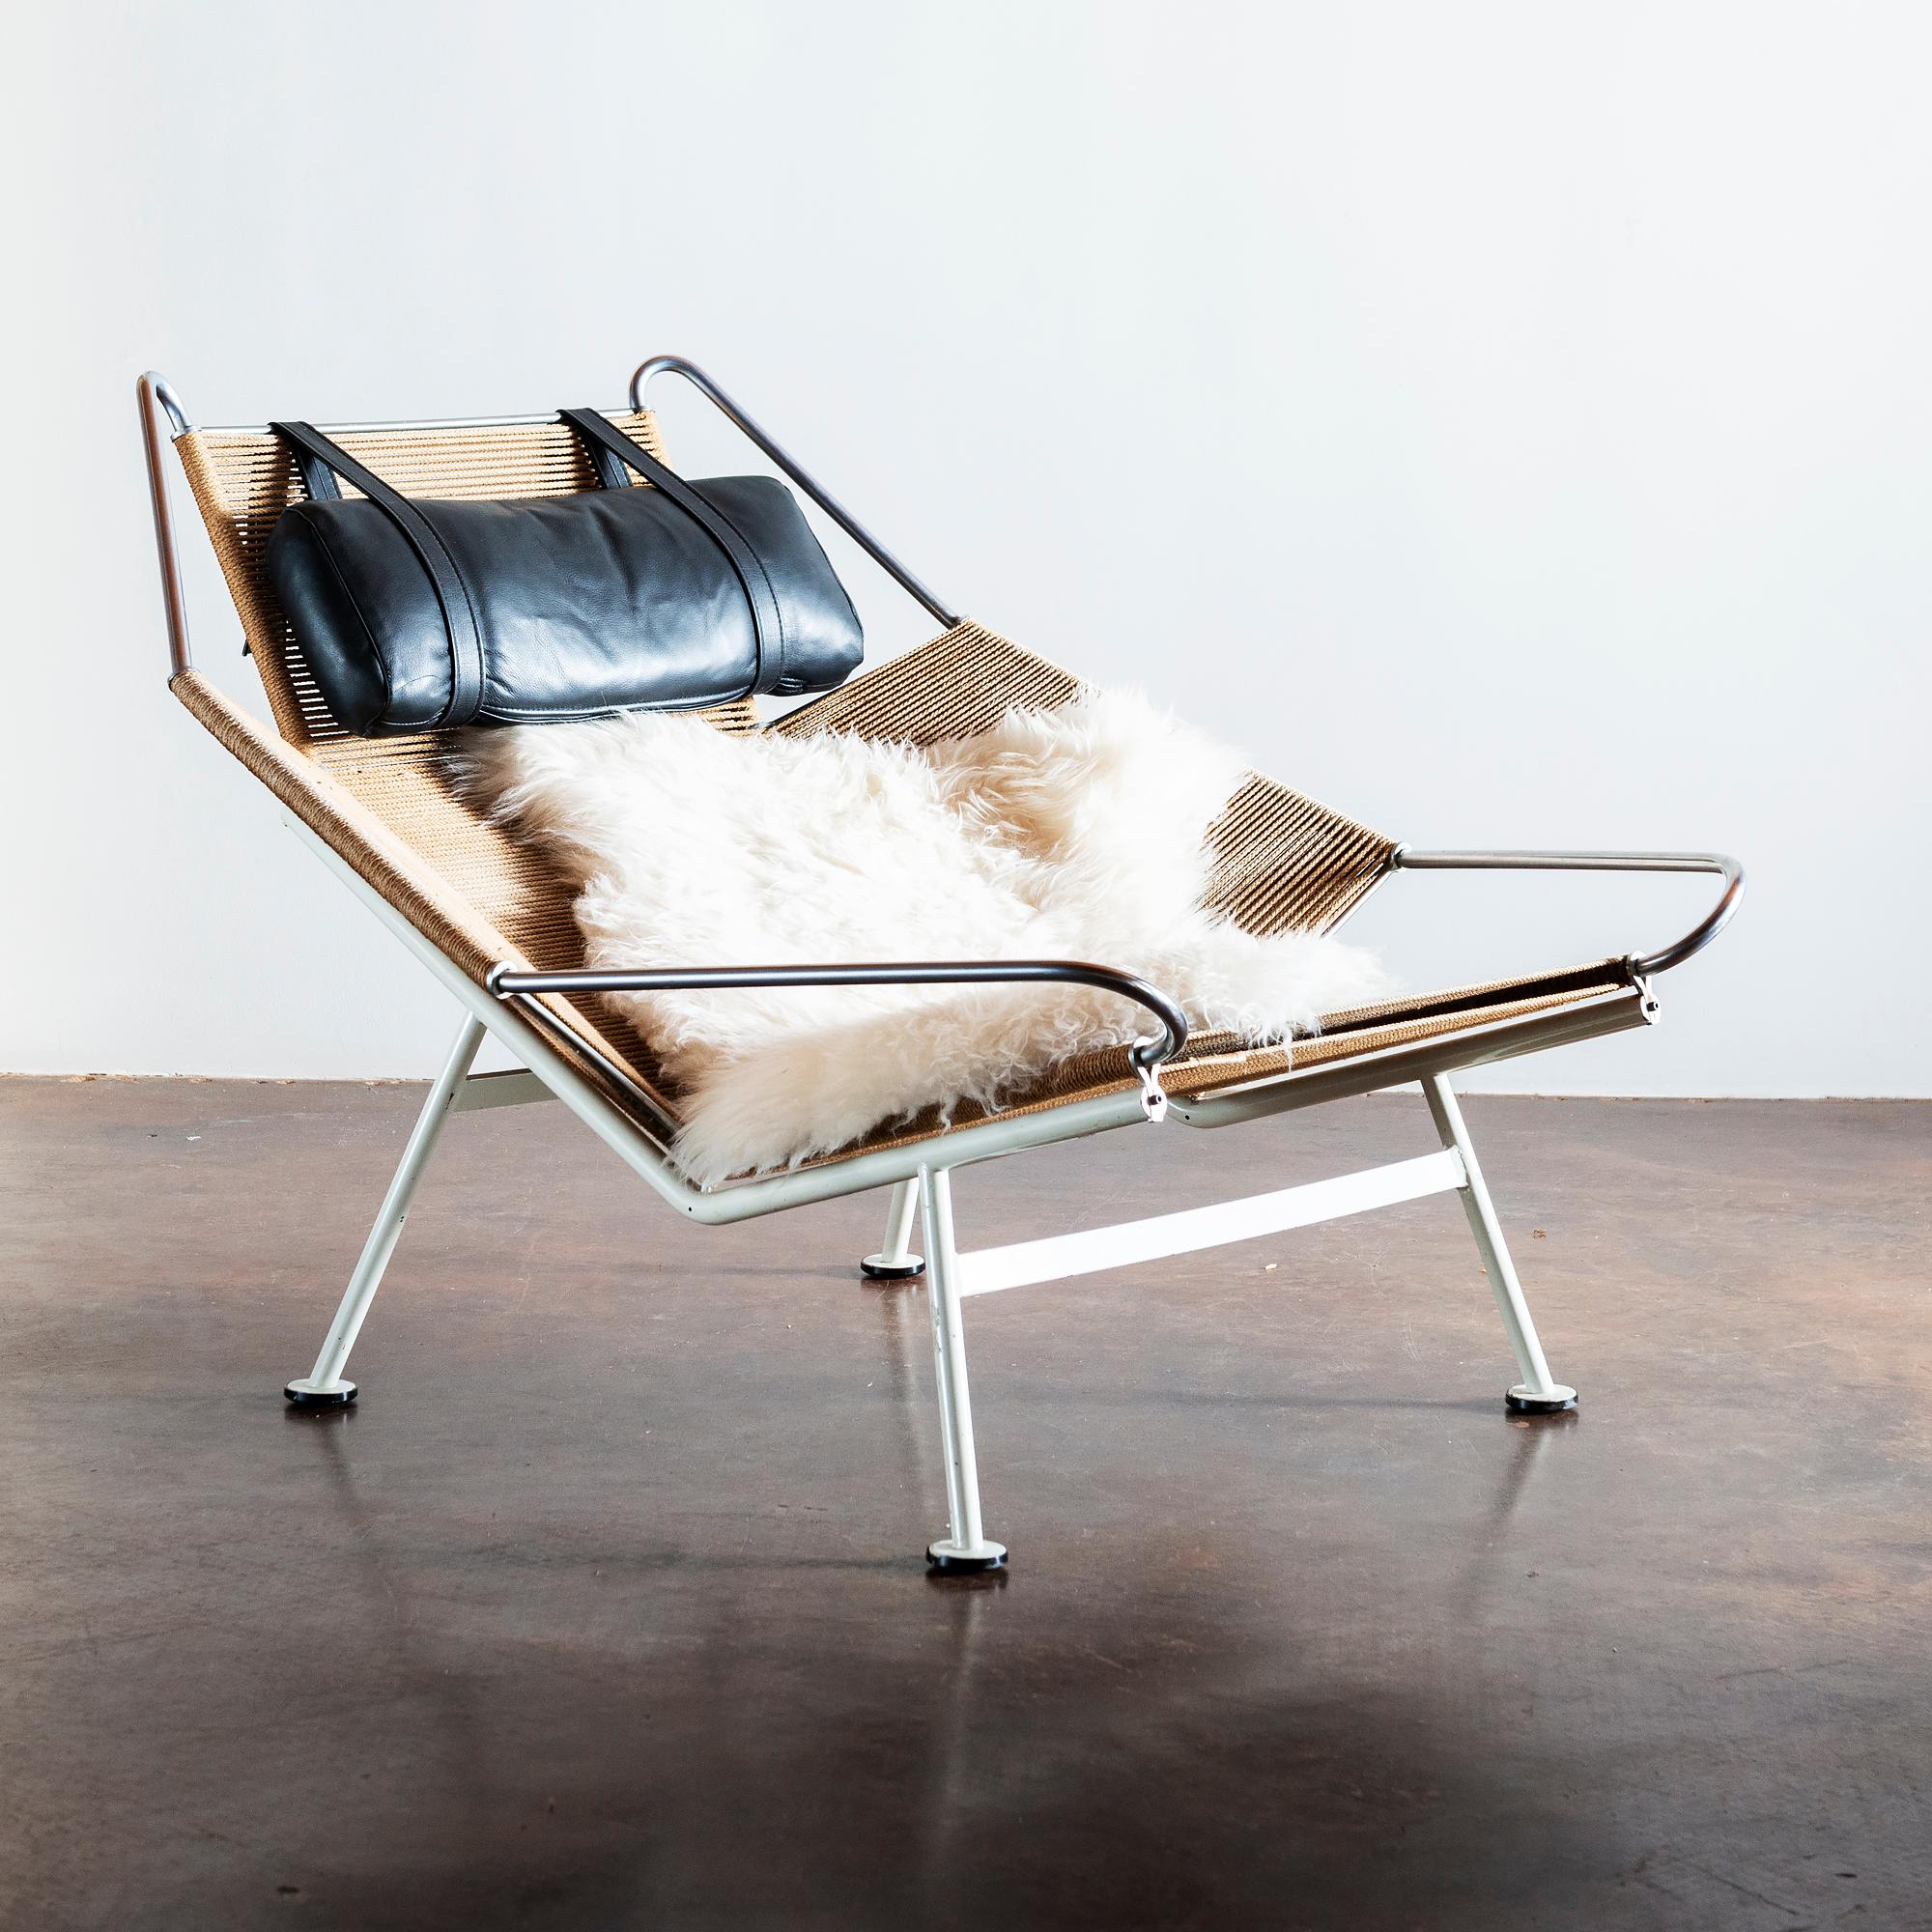 Early Hans Wegner Flag Halyard chair with original lacquered steel frame in white with black feet. Seat and back of continuous plaited flag halyard. Includes adjustable black leather headrest and sheepskin throw. Model GE 225 was designed in 1950